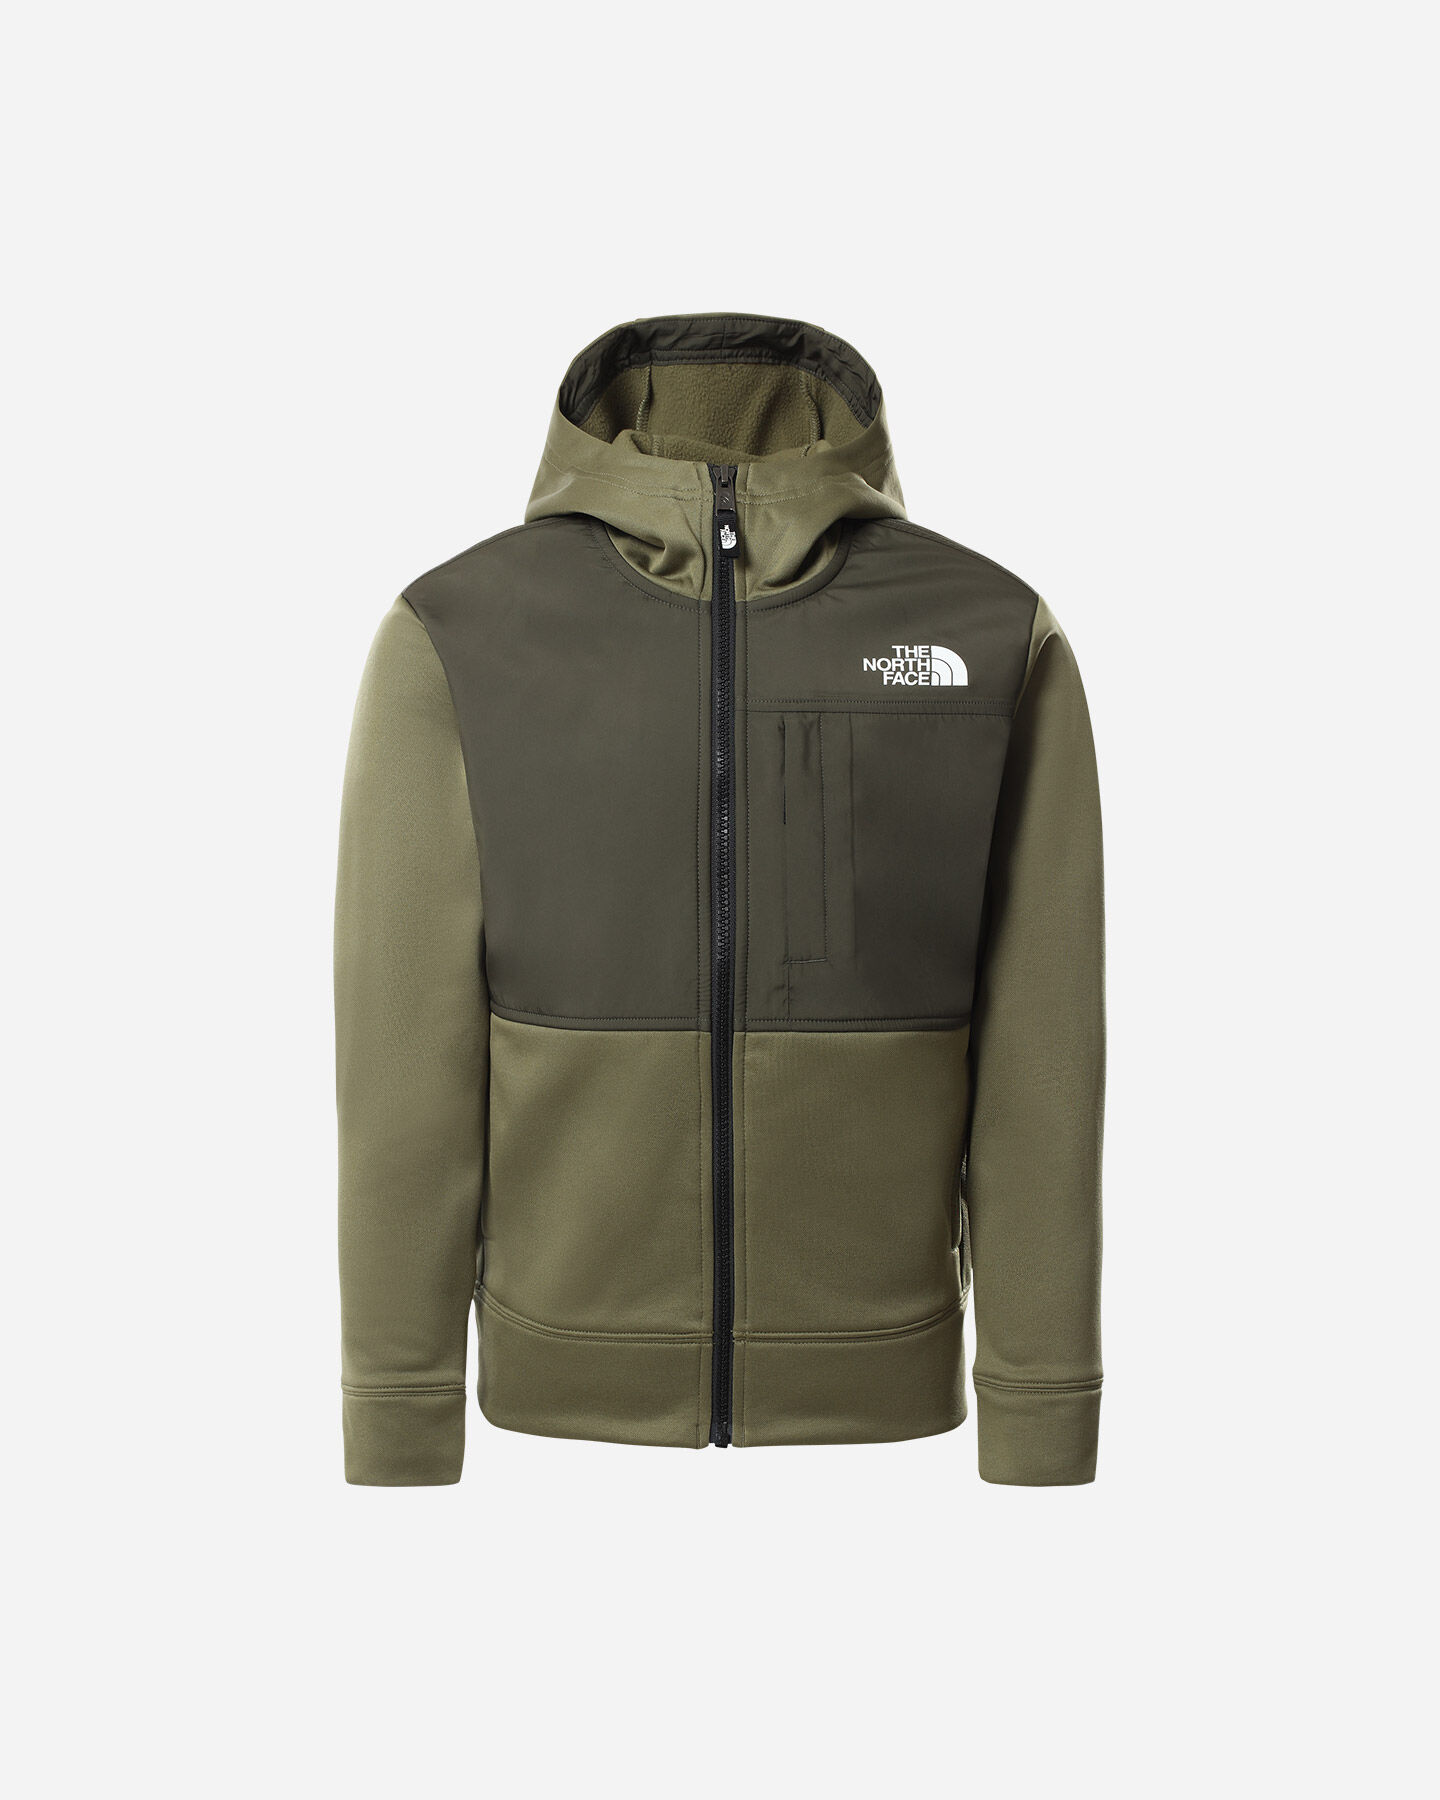  Pile sci THE NORTH FACE SURGENT FZ HD JR S5348545|7D6|S scatto 0